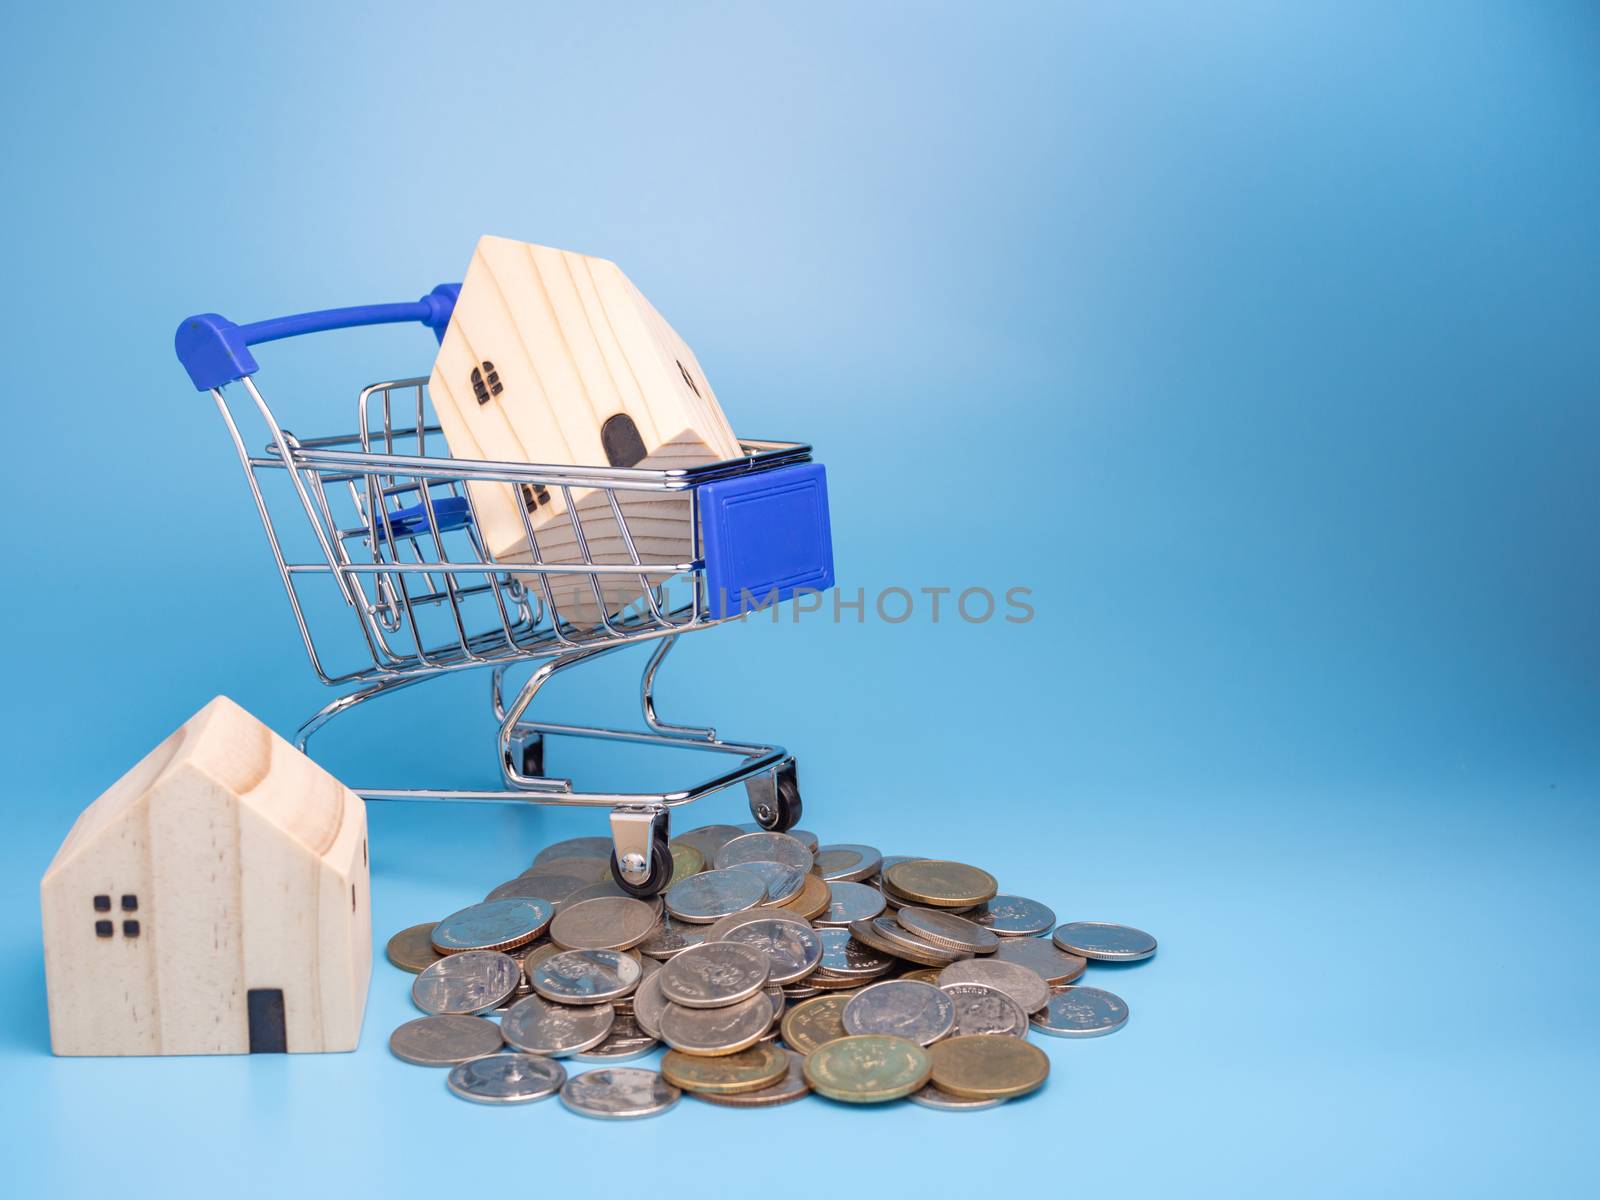 A model wooden house on a shopping cart With a pile of coins On a blue background. Mortgage concept. Money and house.